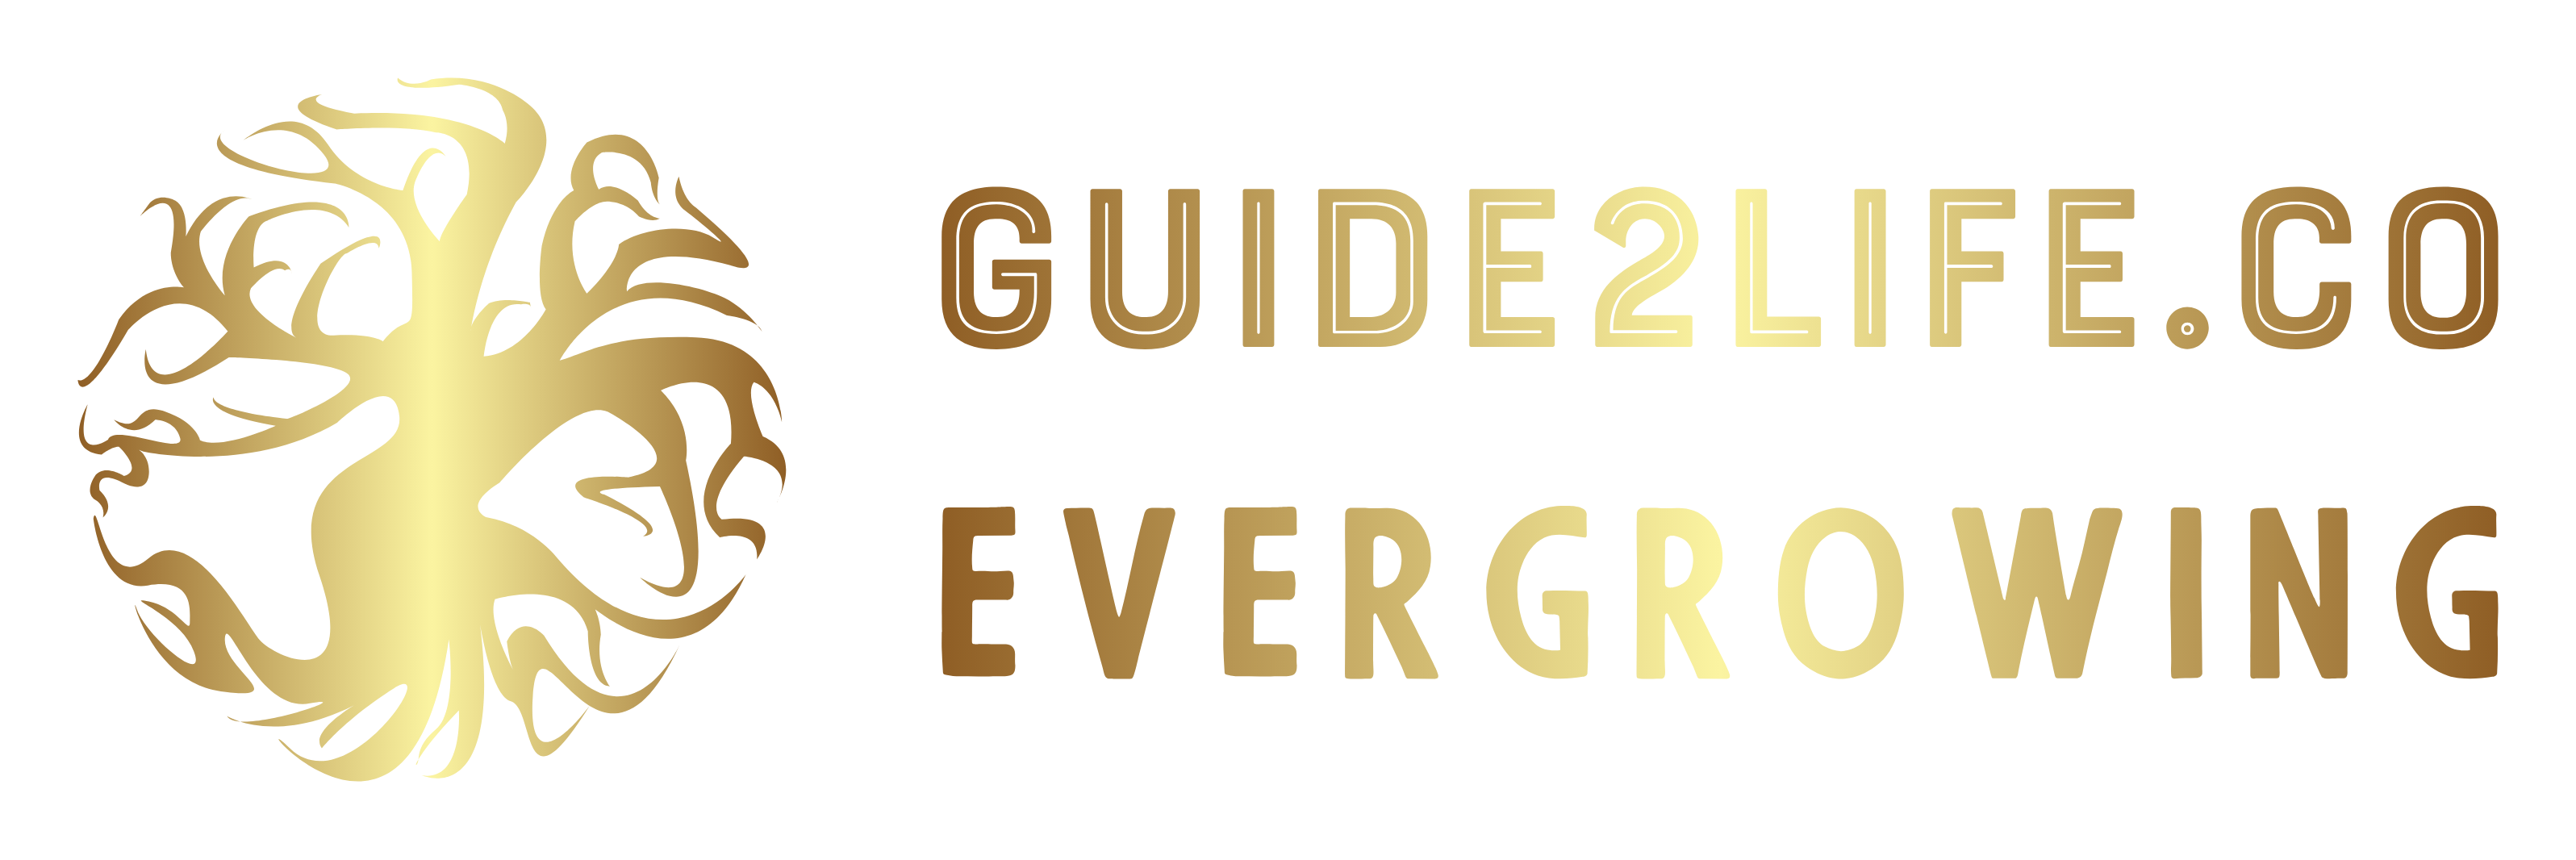 Guide2Life.co